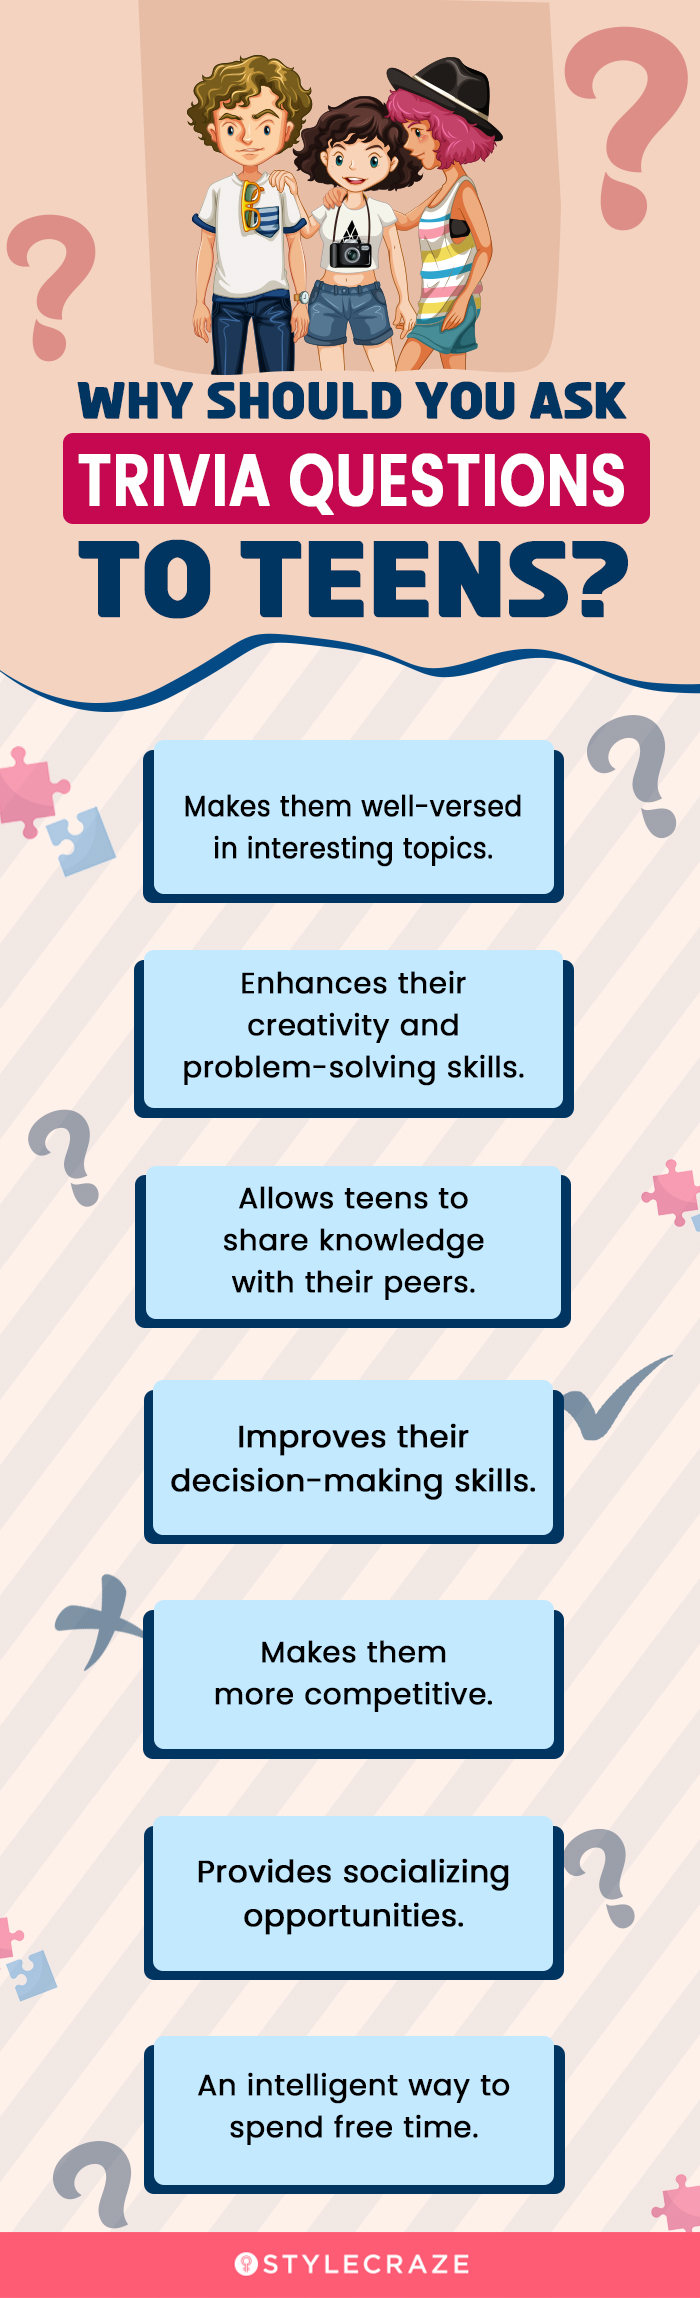 why should you ask trivia questions to teens (infographic)